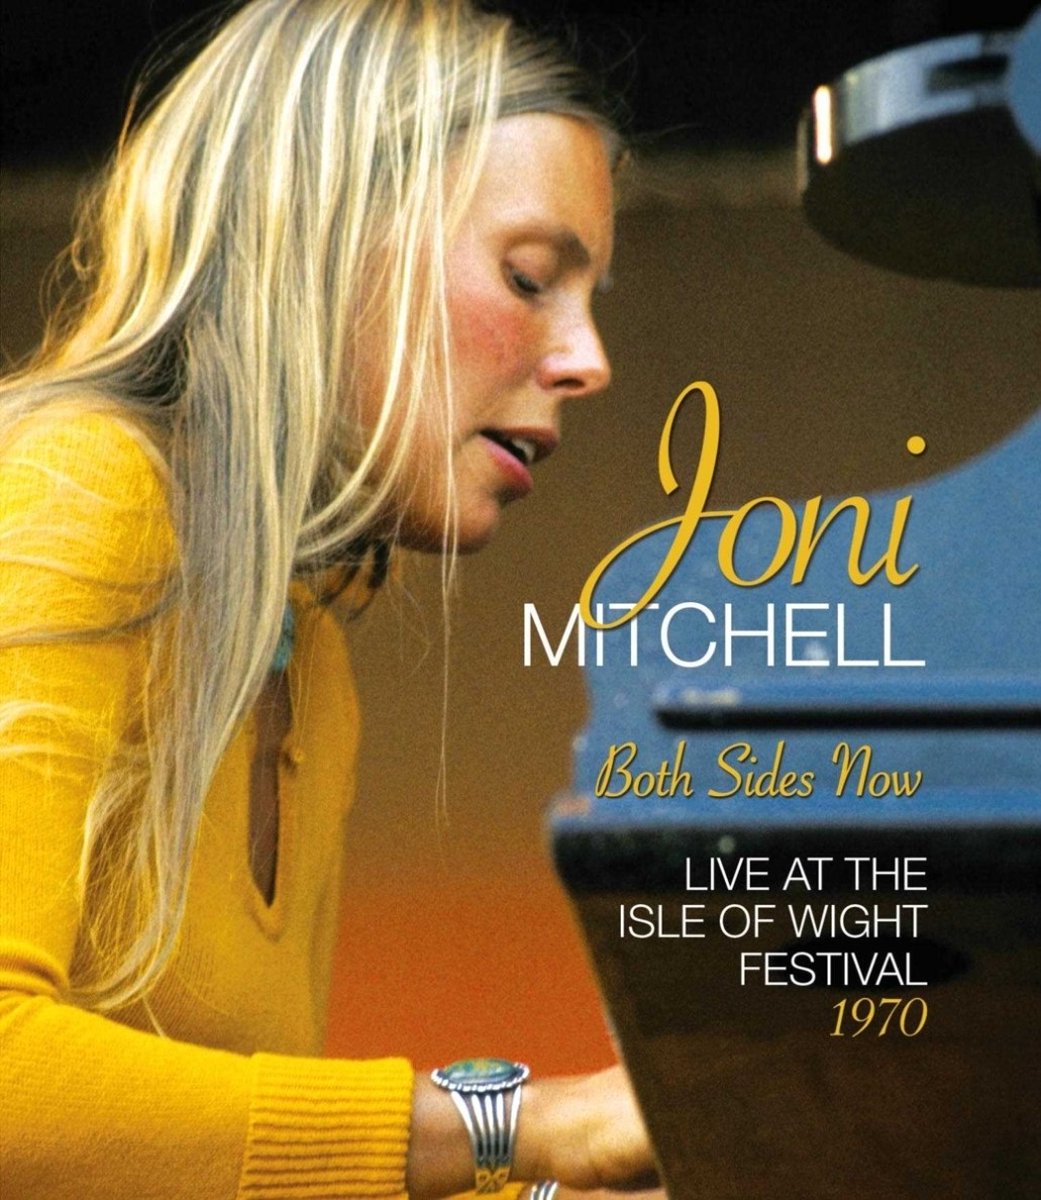 Joni Mitchell - Both Sides Now: Live at the Isle of Wight Festival 1970 (Blu-ray)